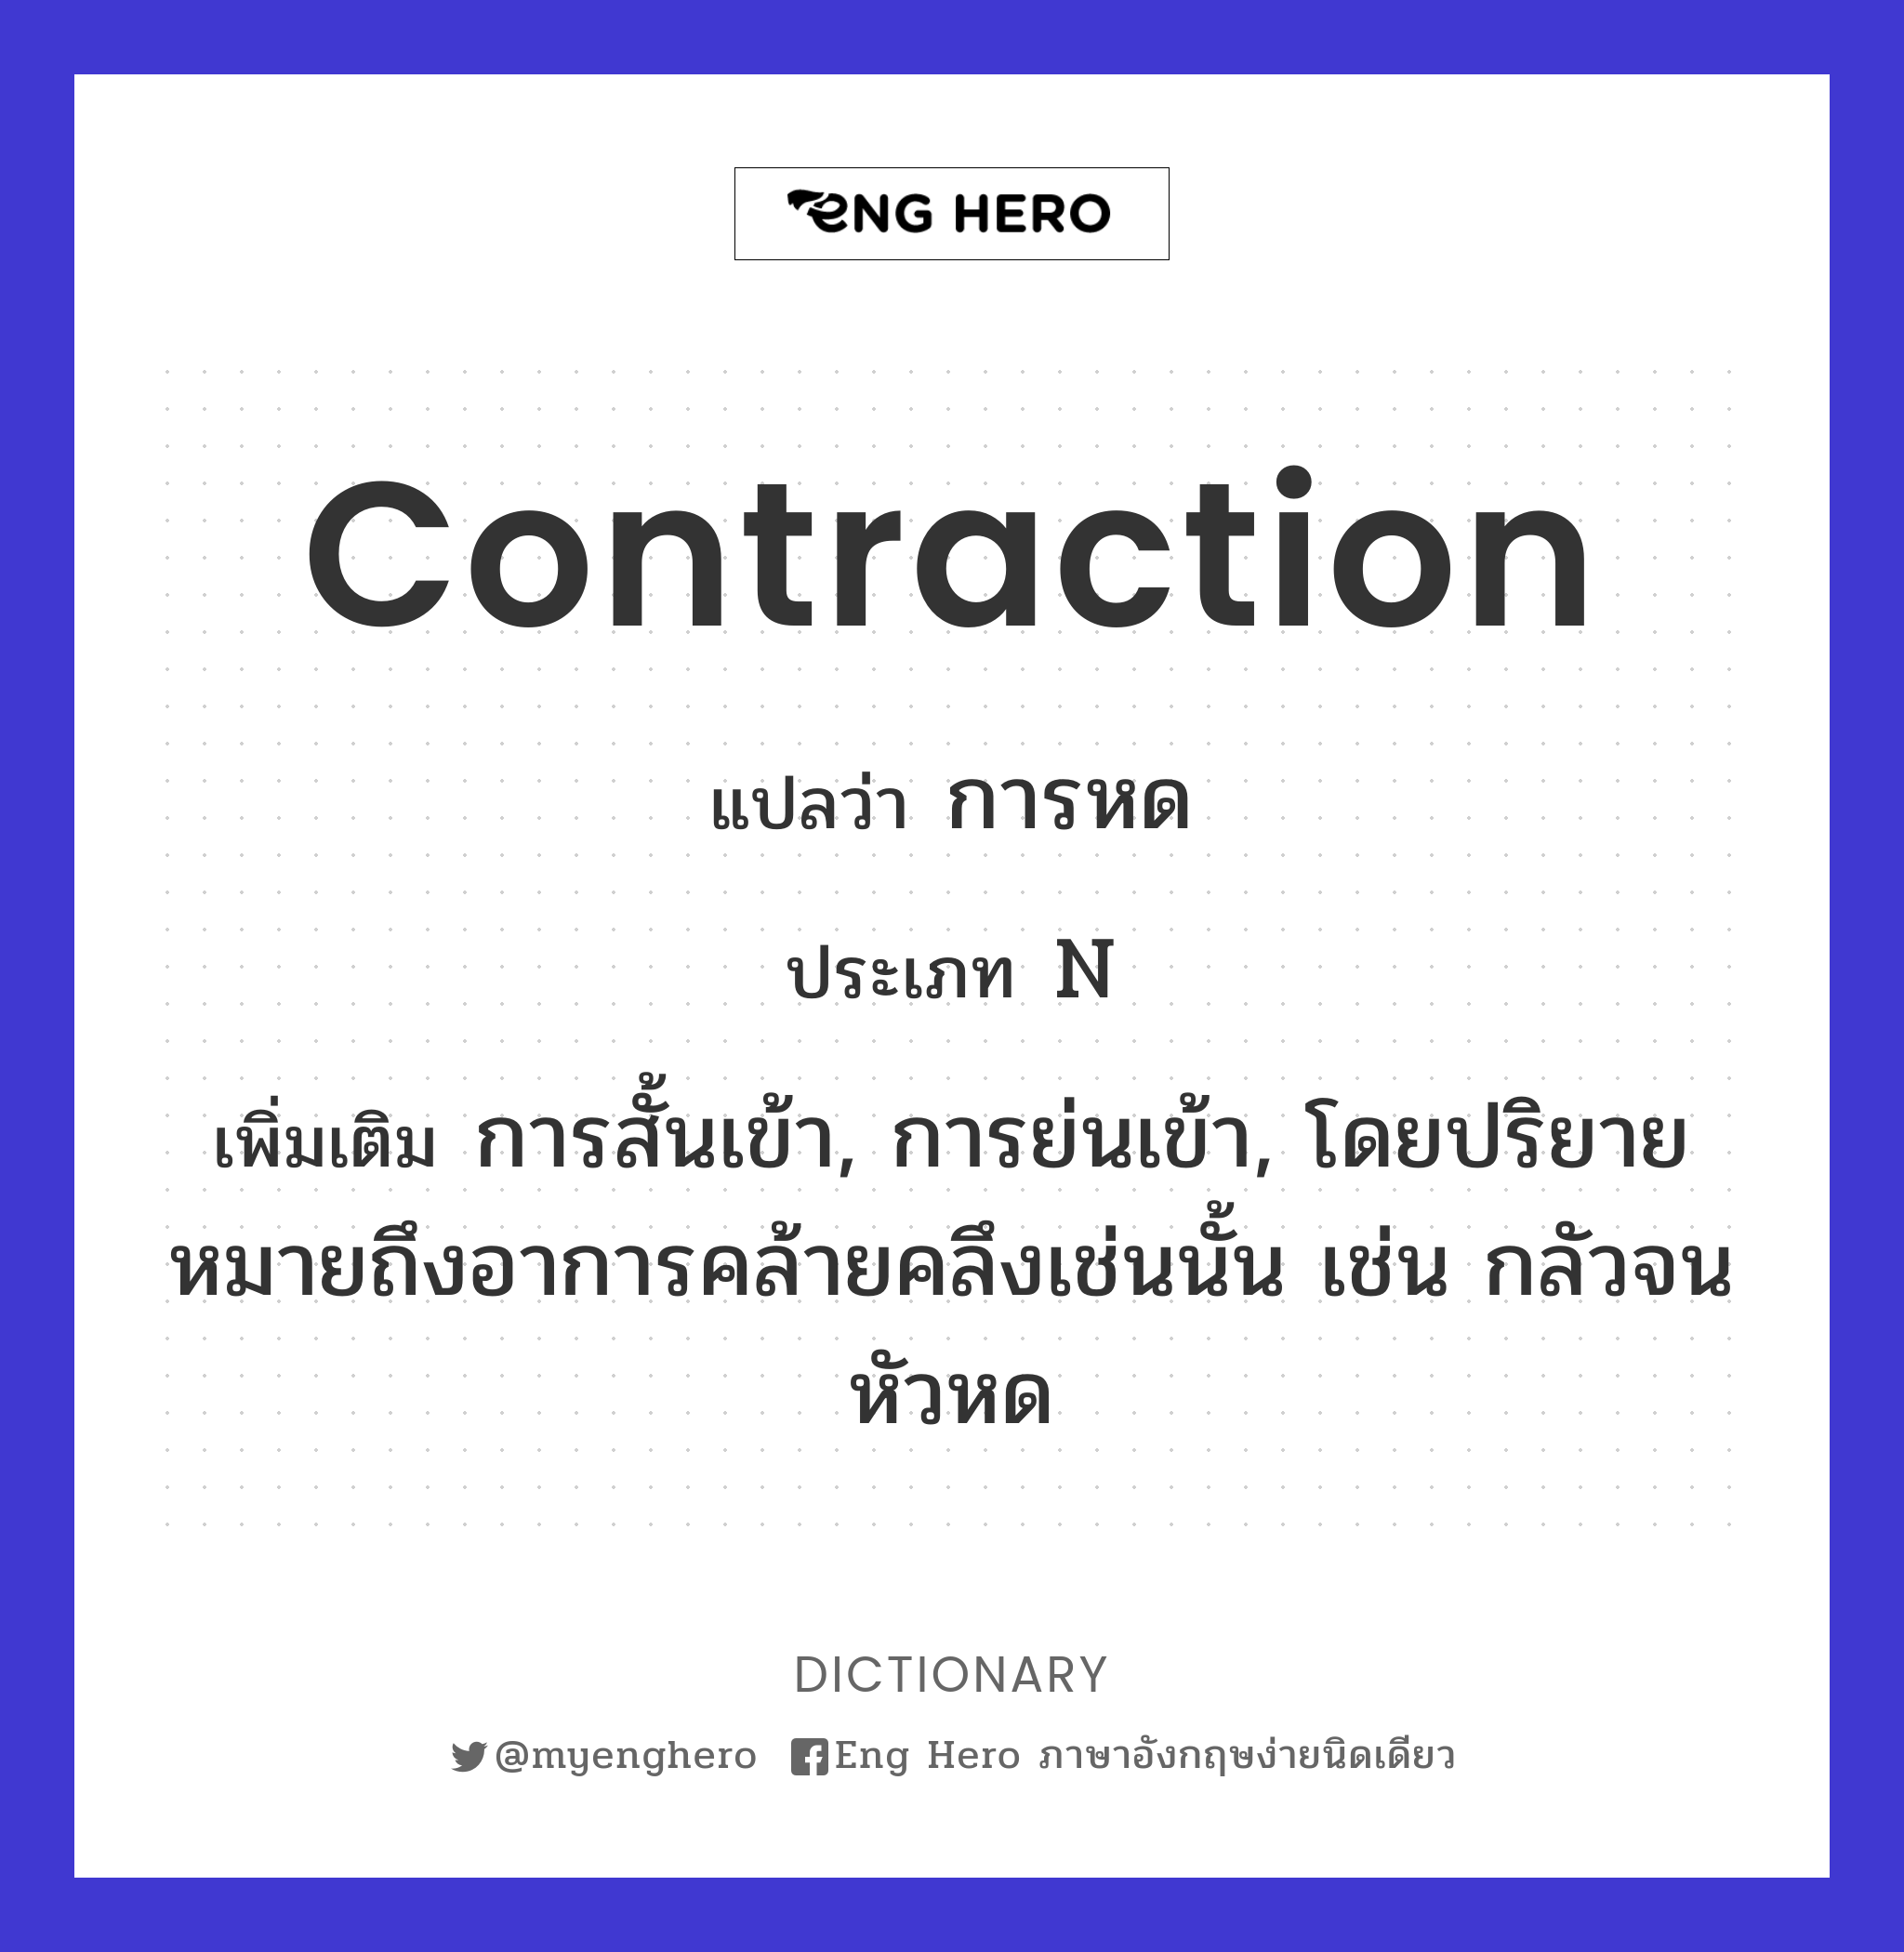 contraction